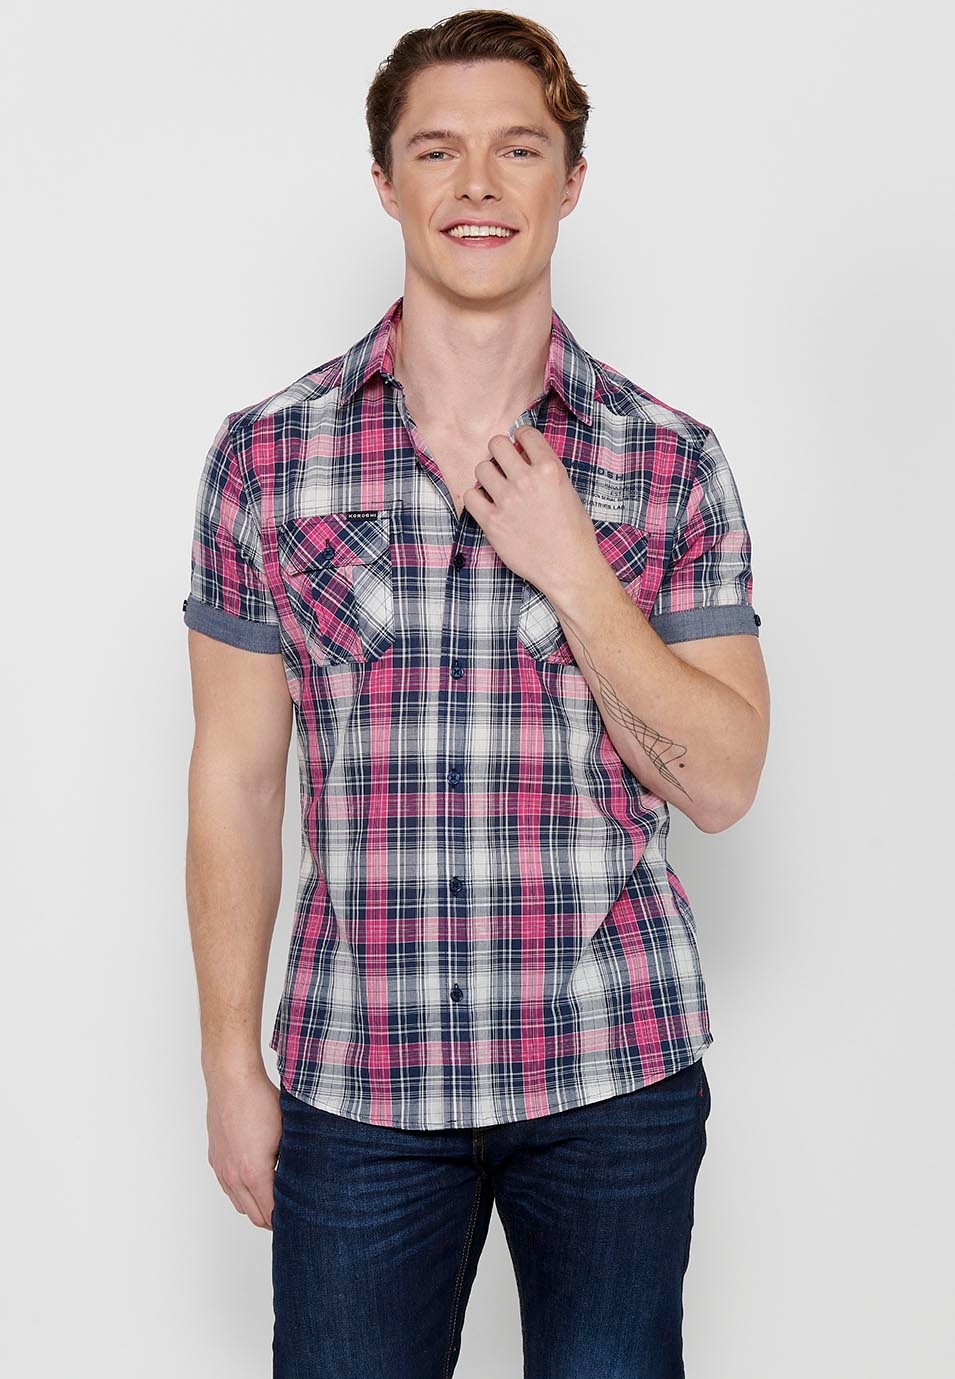 Short Sleeve Cotton Shirt with Turn-Up Finish and Button Front Closure with Front Flap Pockets and Pink Plaid Print for Men